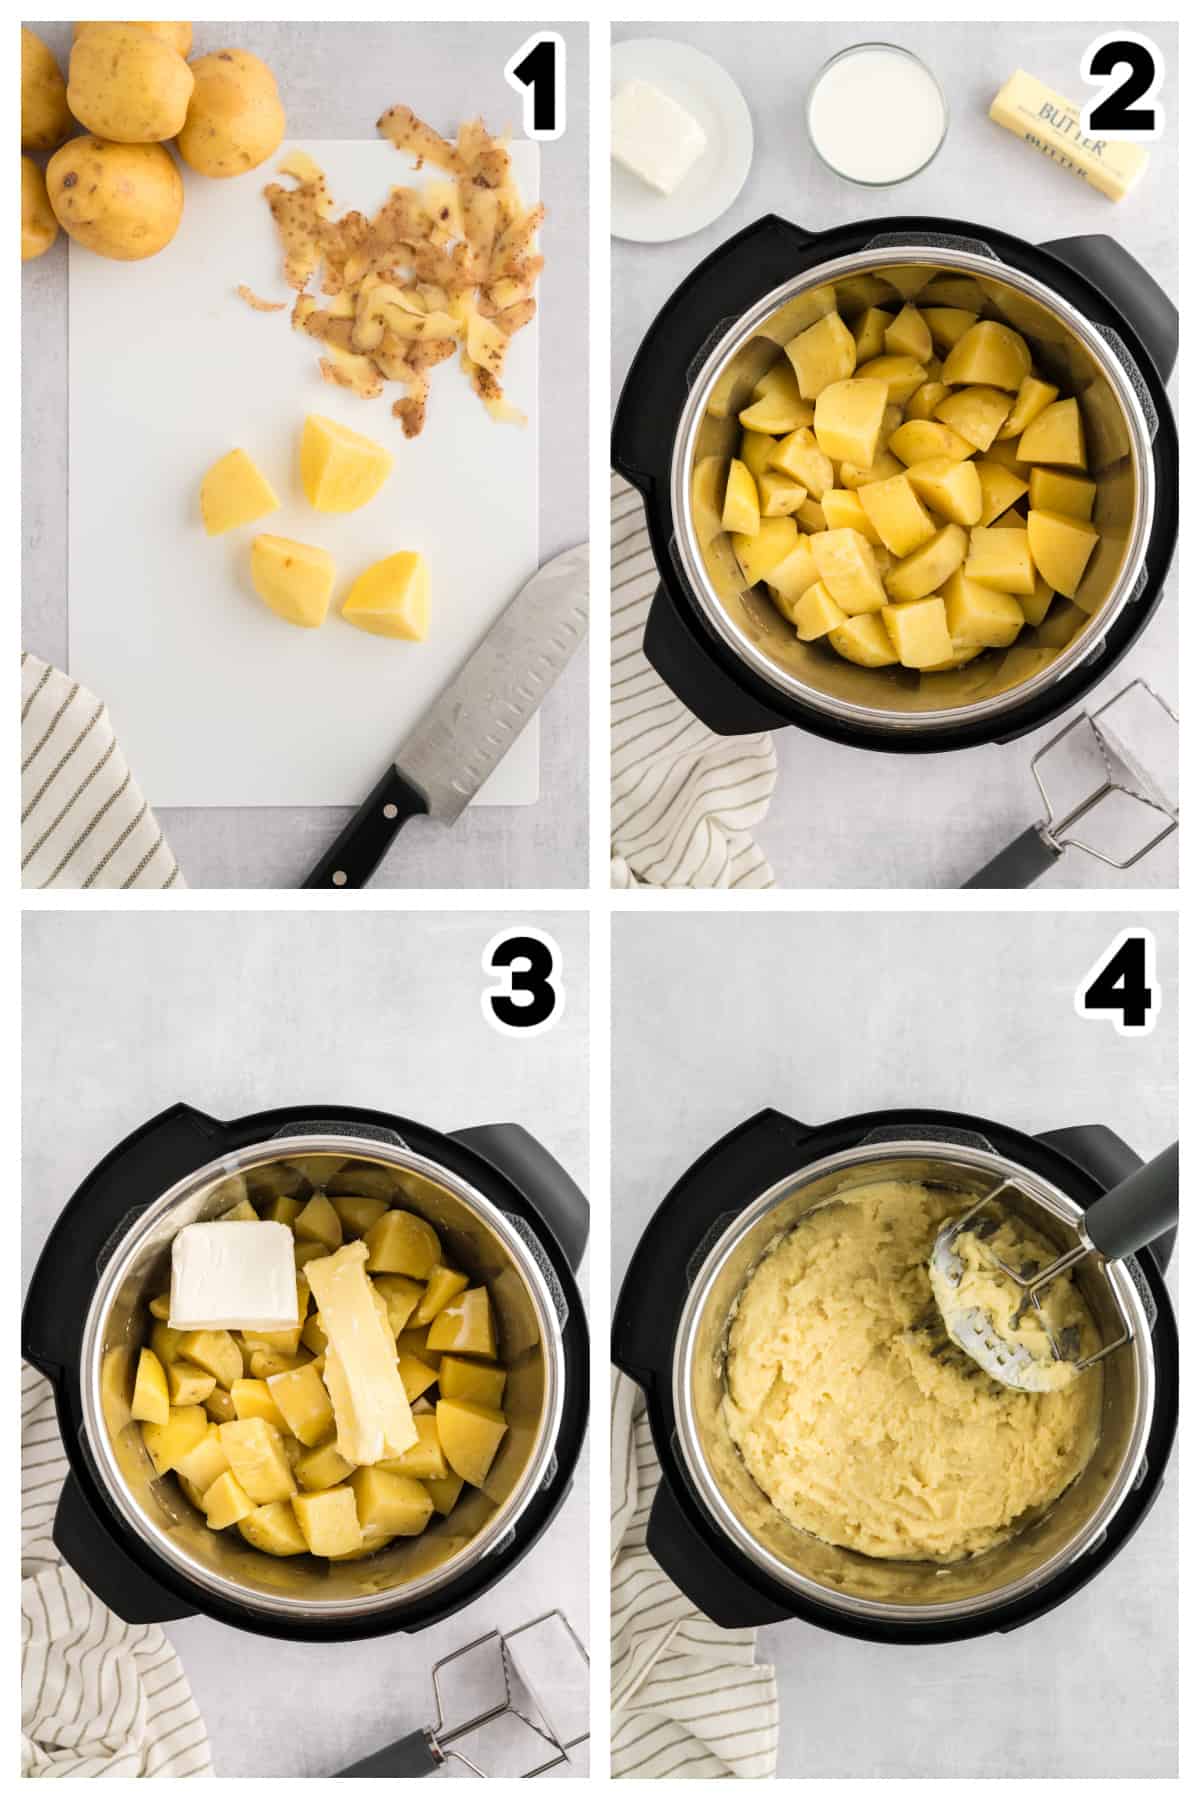 Collage showing how to make Instant Pot mashed potatoes.